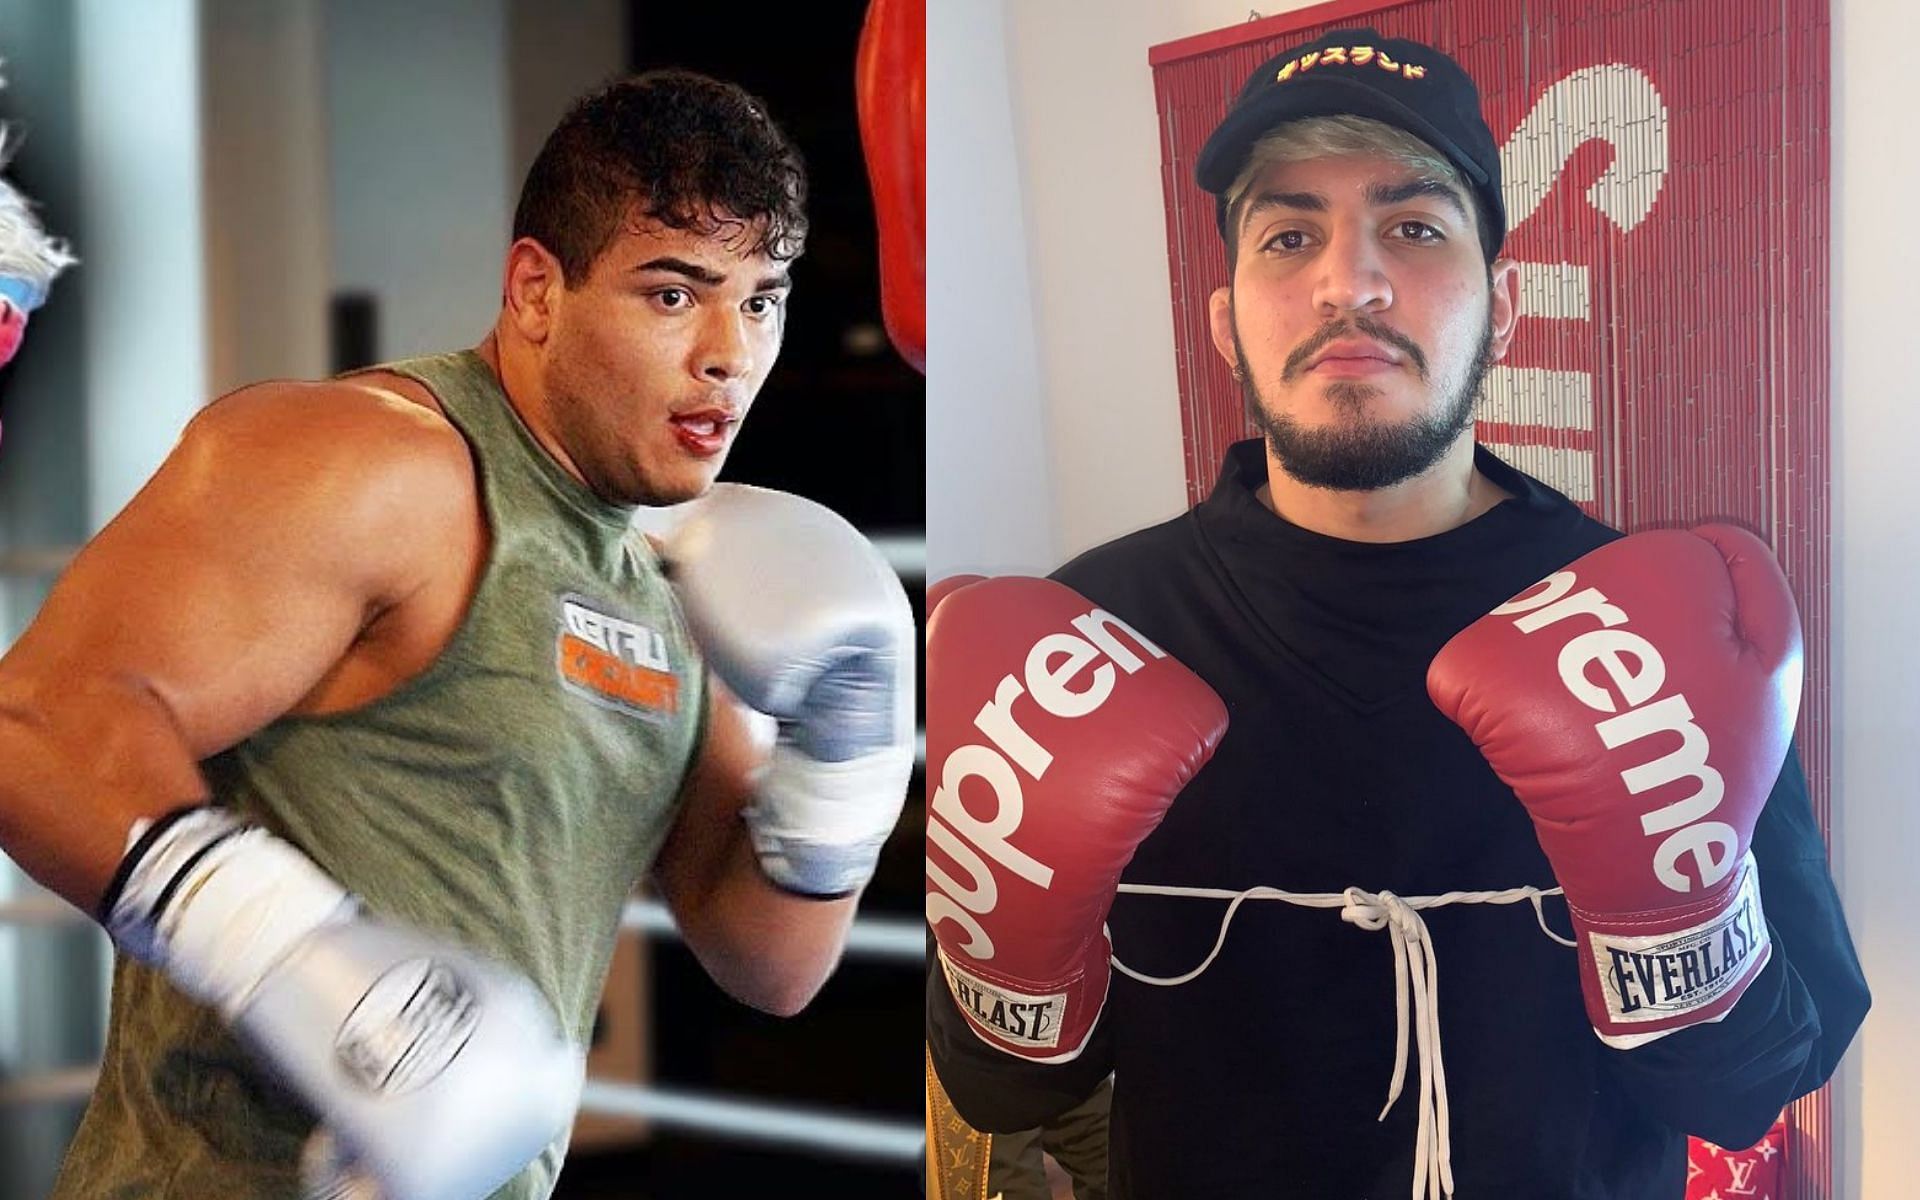 Paulo Costa (L) and Dillon Danis (R) [Images Courtesy: Getty]